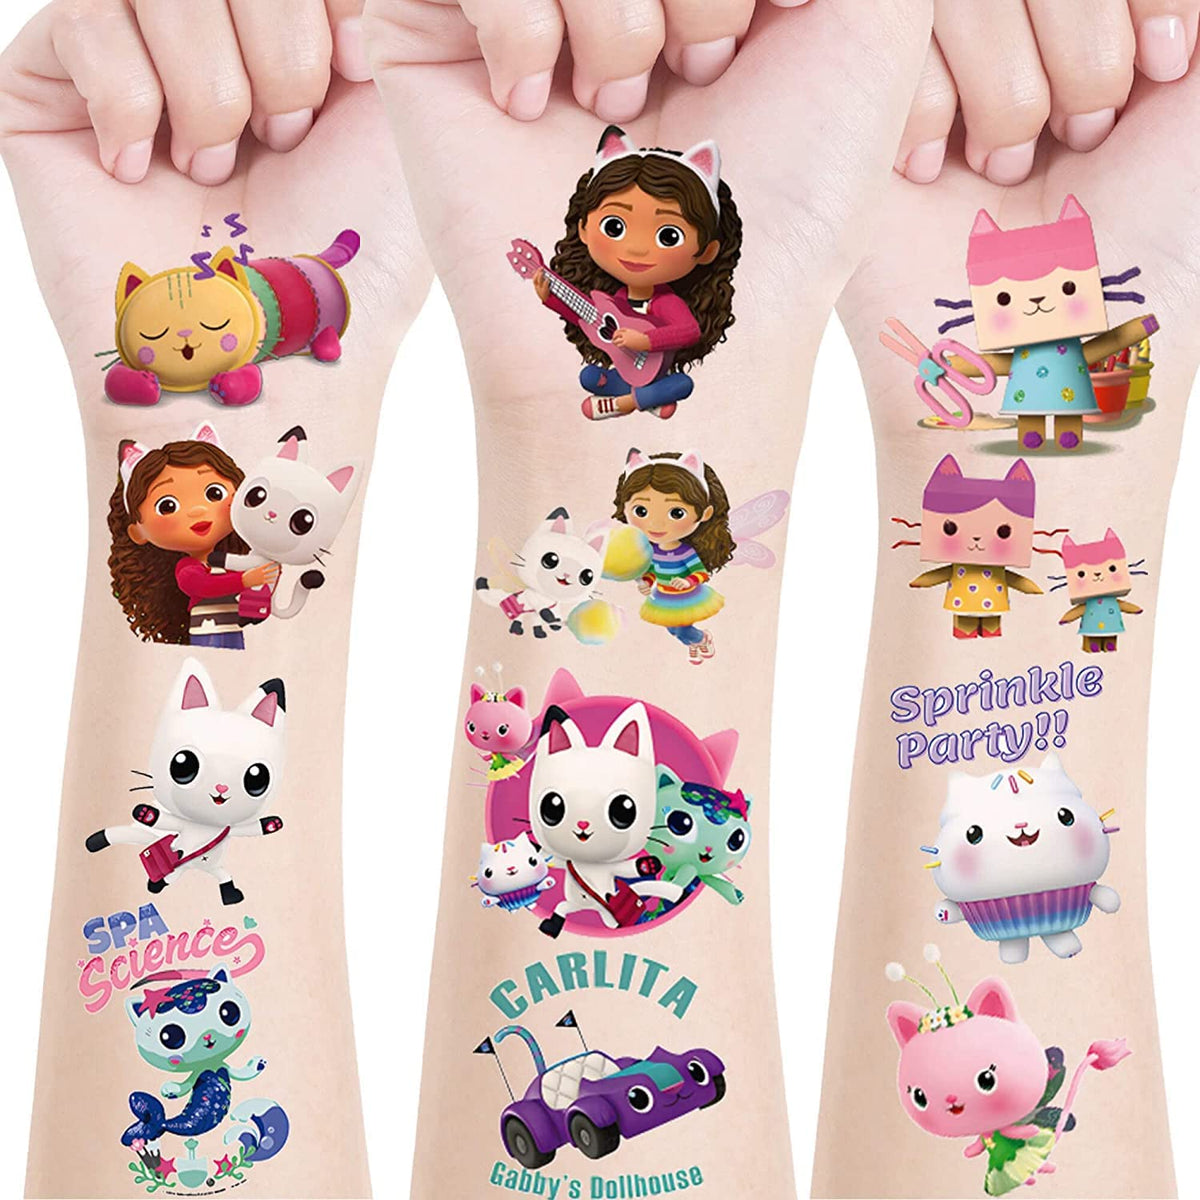 4 Sheet Temporary Tattoos for Kids, Birthday Party Supplies Decorations Favors Video Game Tattoos Stickers Gifts for Boys Girls Cute Themed Party Classroom School Prizes